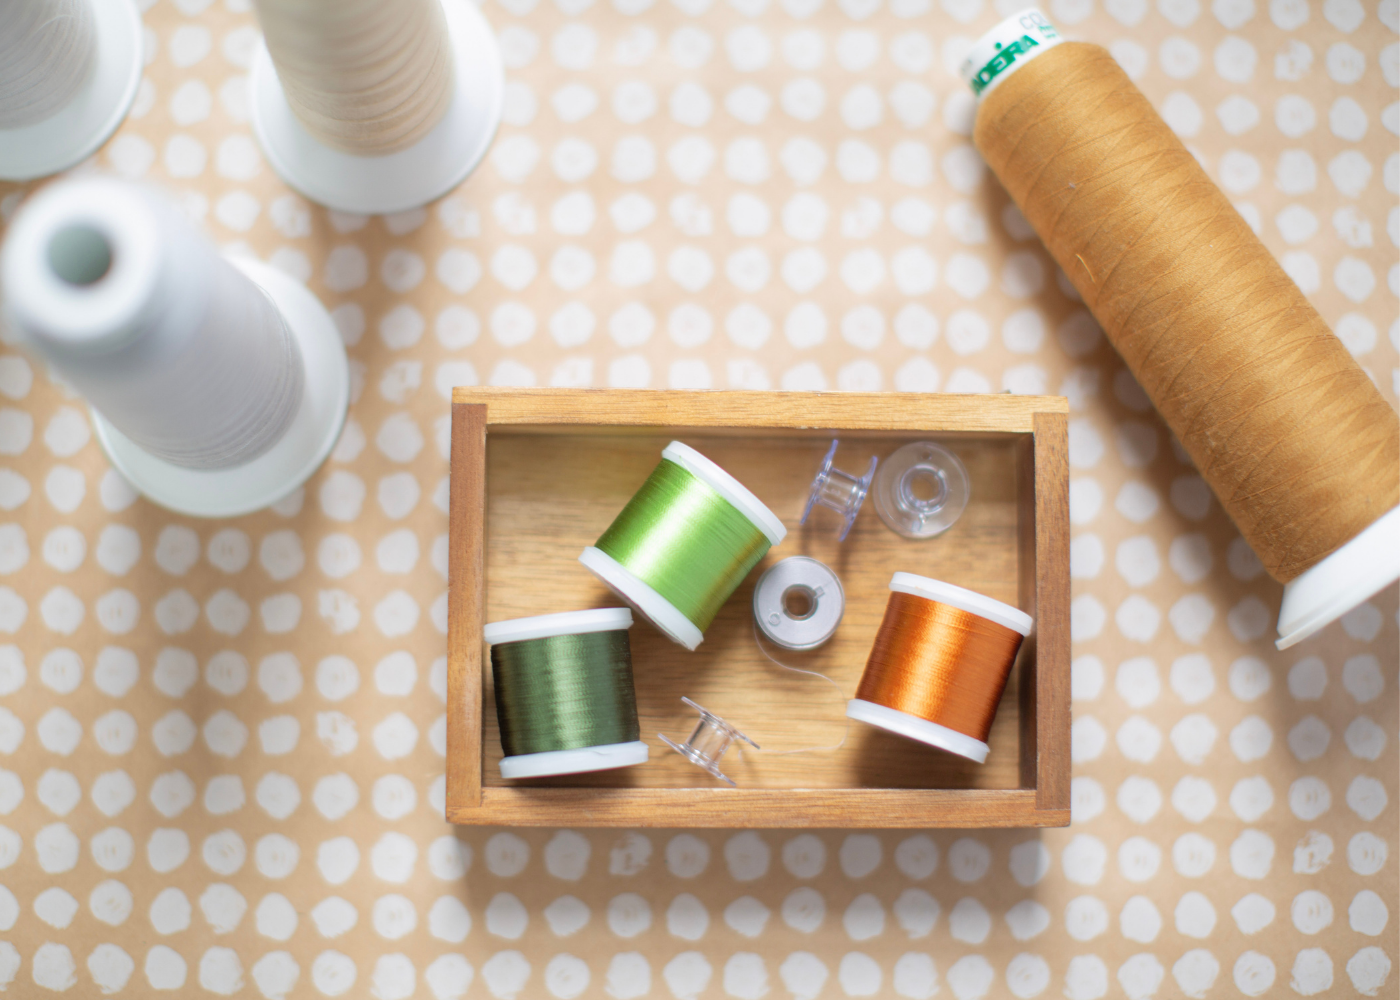 What are Basic Sewing Supplies?